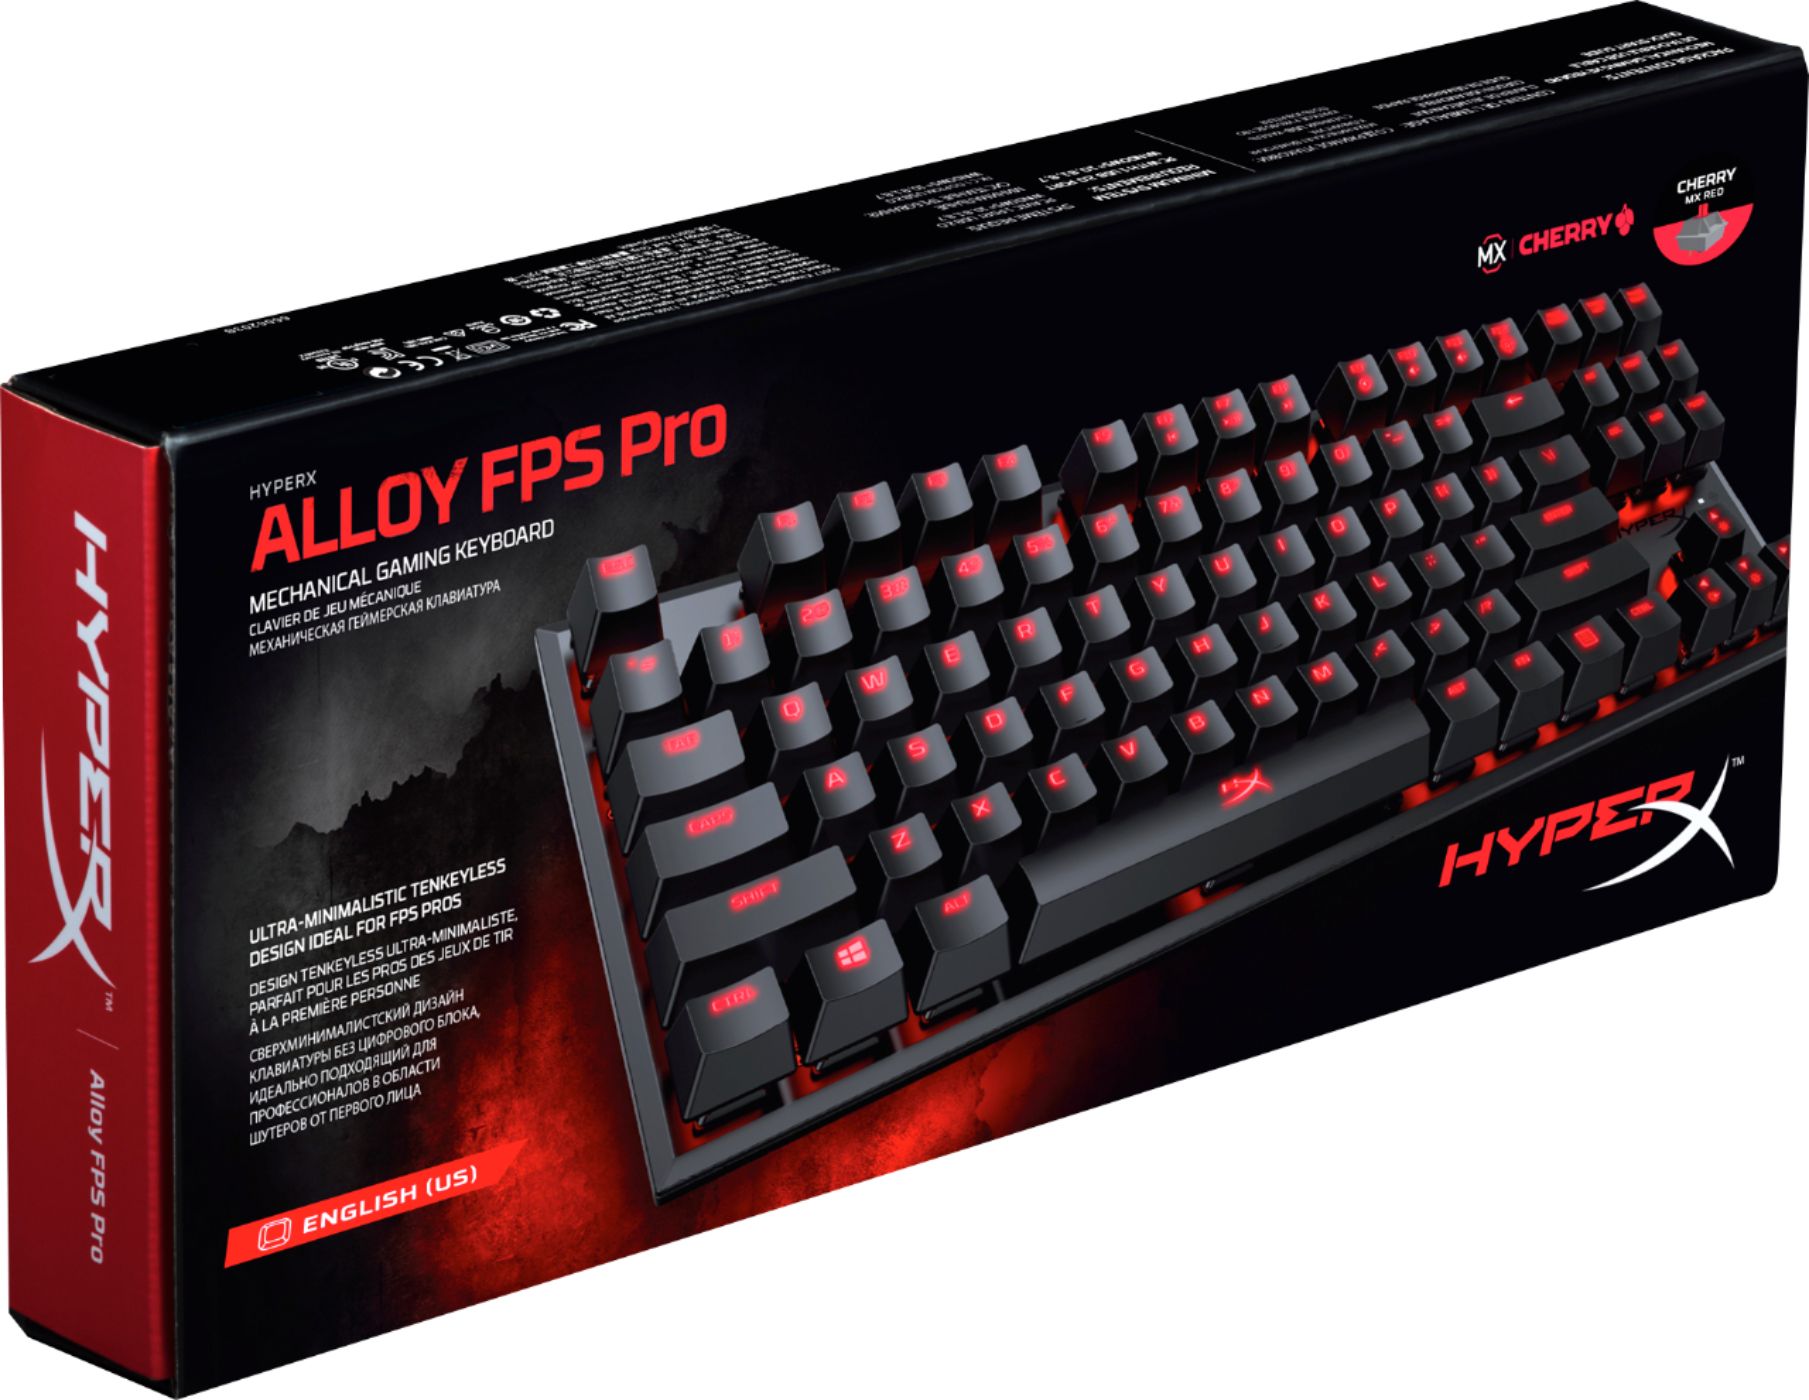 Clicky Ultra-Compact Form Factor 87-Key Red LED Backlit HX-KB4BL1-US/WW Tenkeyless Mechanical Gaming Keyboard Cherry MX Blue HyperX Alloy FPS Pro 